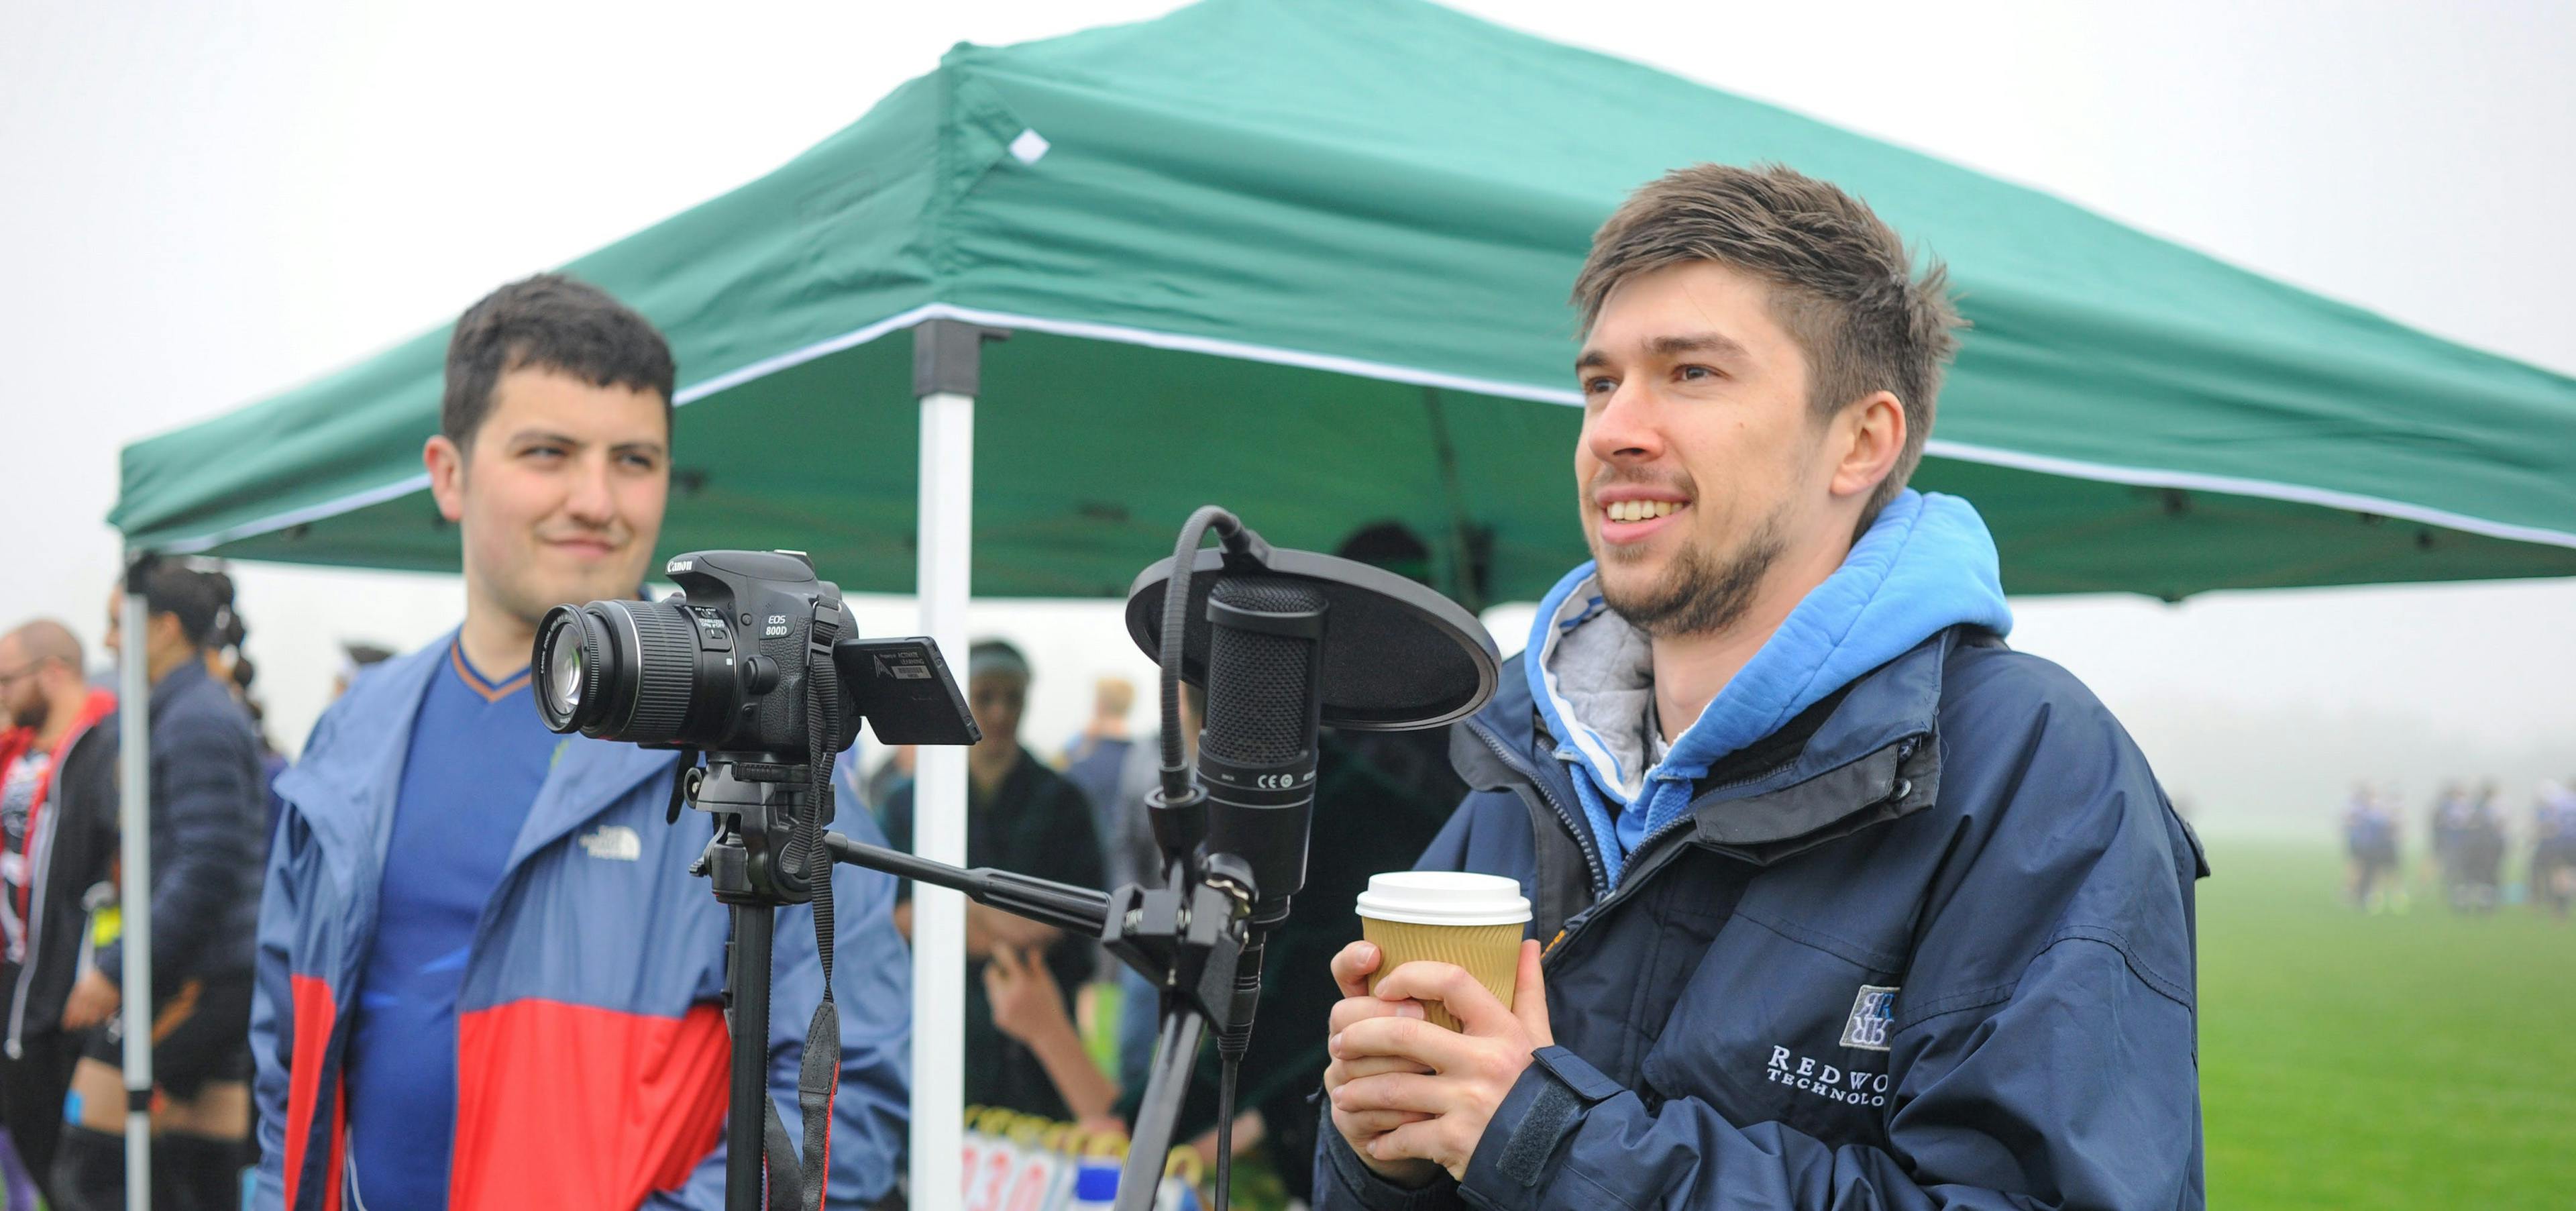 A camera operator (left) and a commentator (right) help capture the moment in a game of quadball on a foggy day.